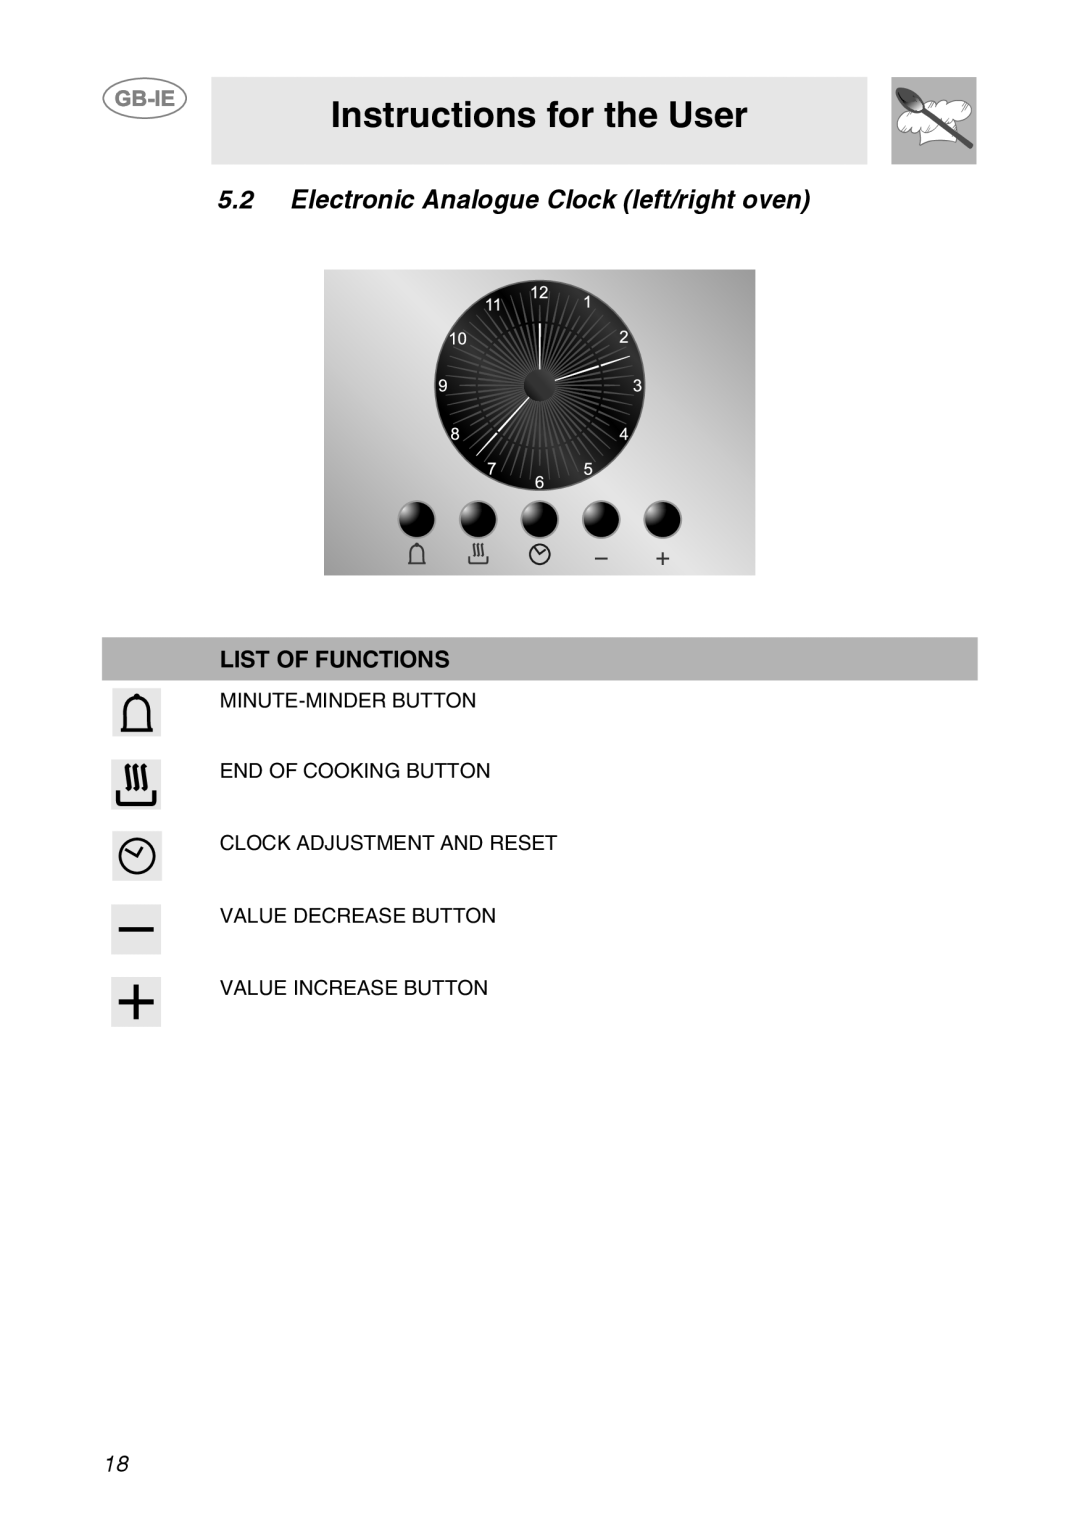 Smeg CS150SA manual Instructions for the User, 5.2Electronic Analogue Clock left/right oven, List Of Functions 